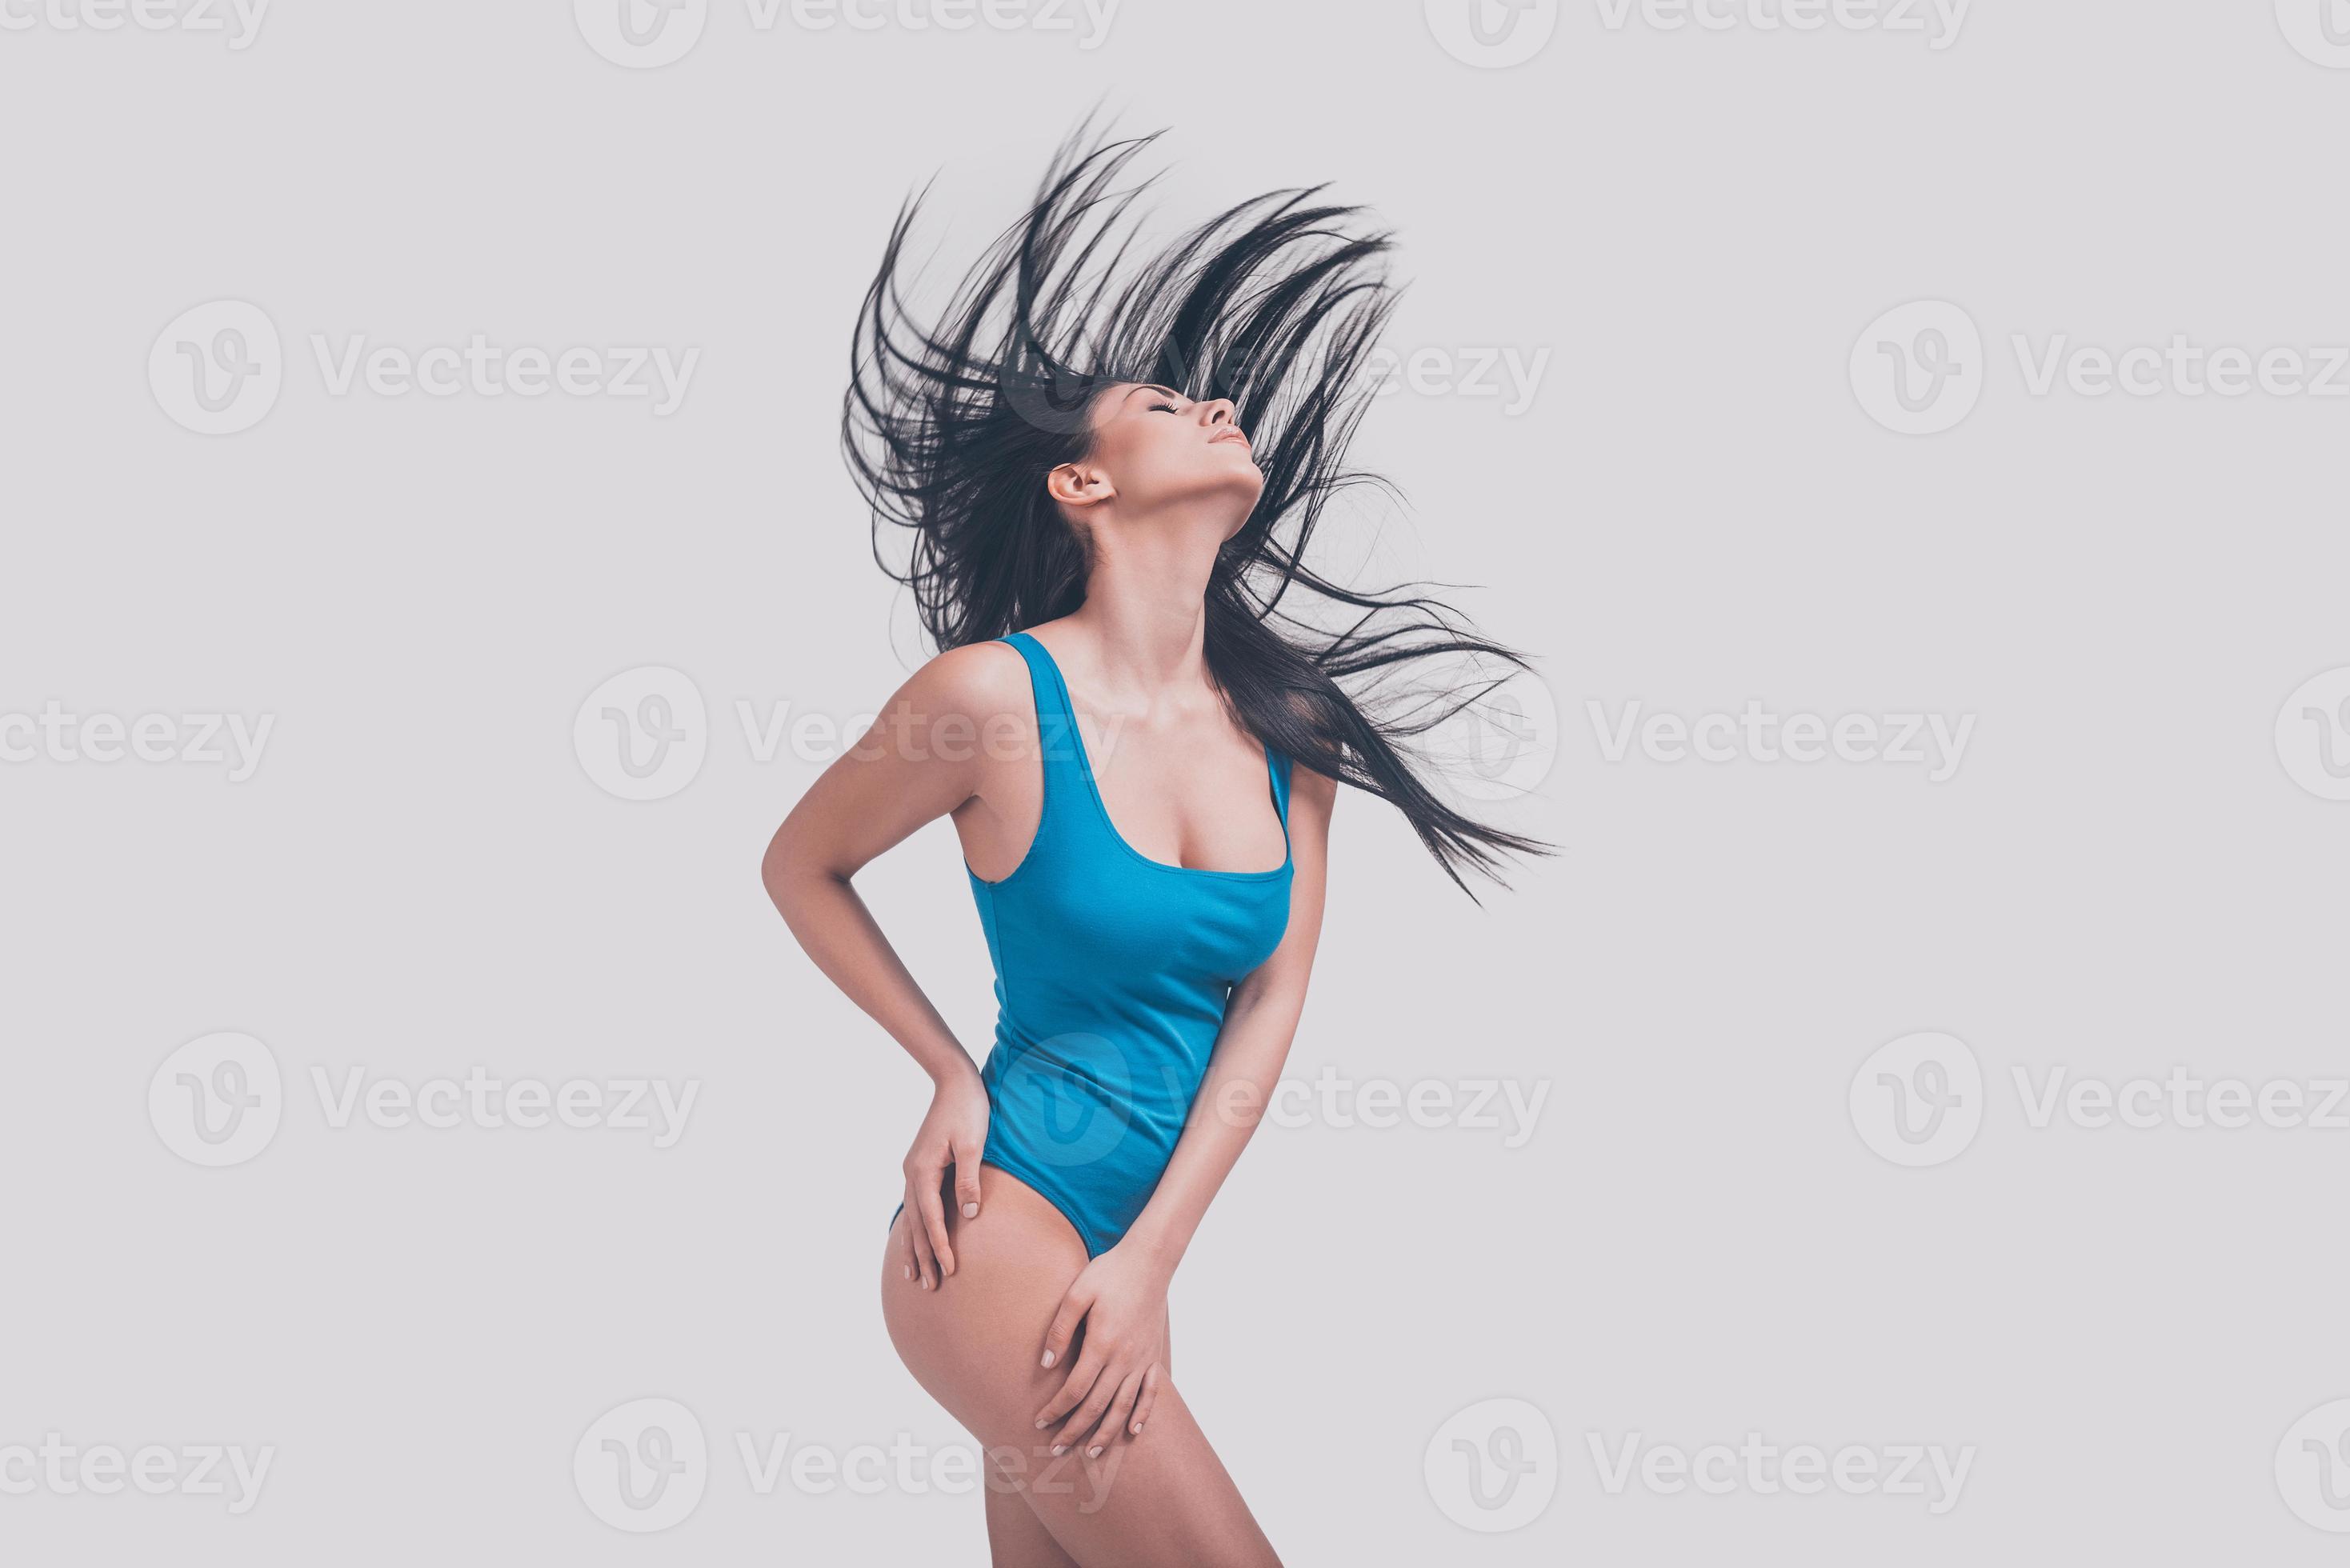 Beauty in motion. Attractive young woman in blue swimsuit keeping